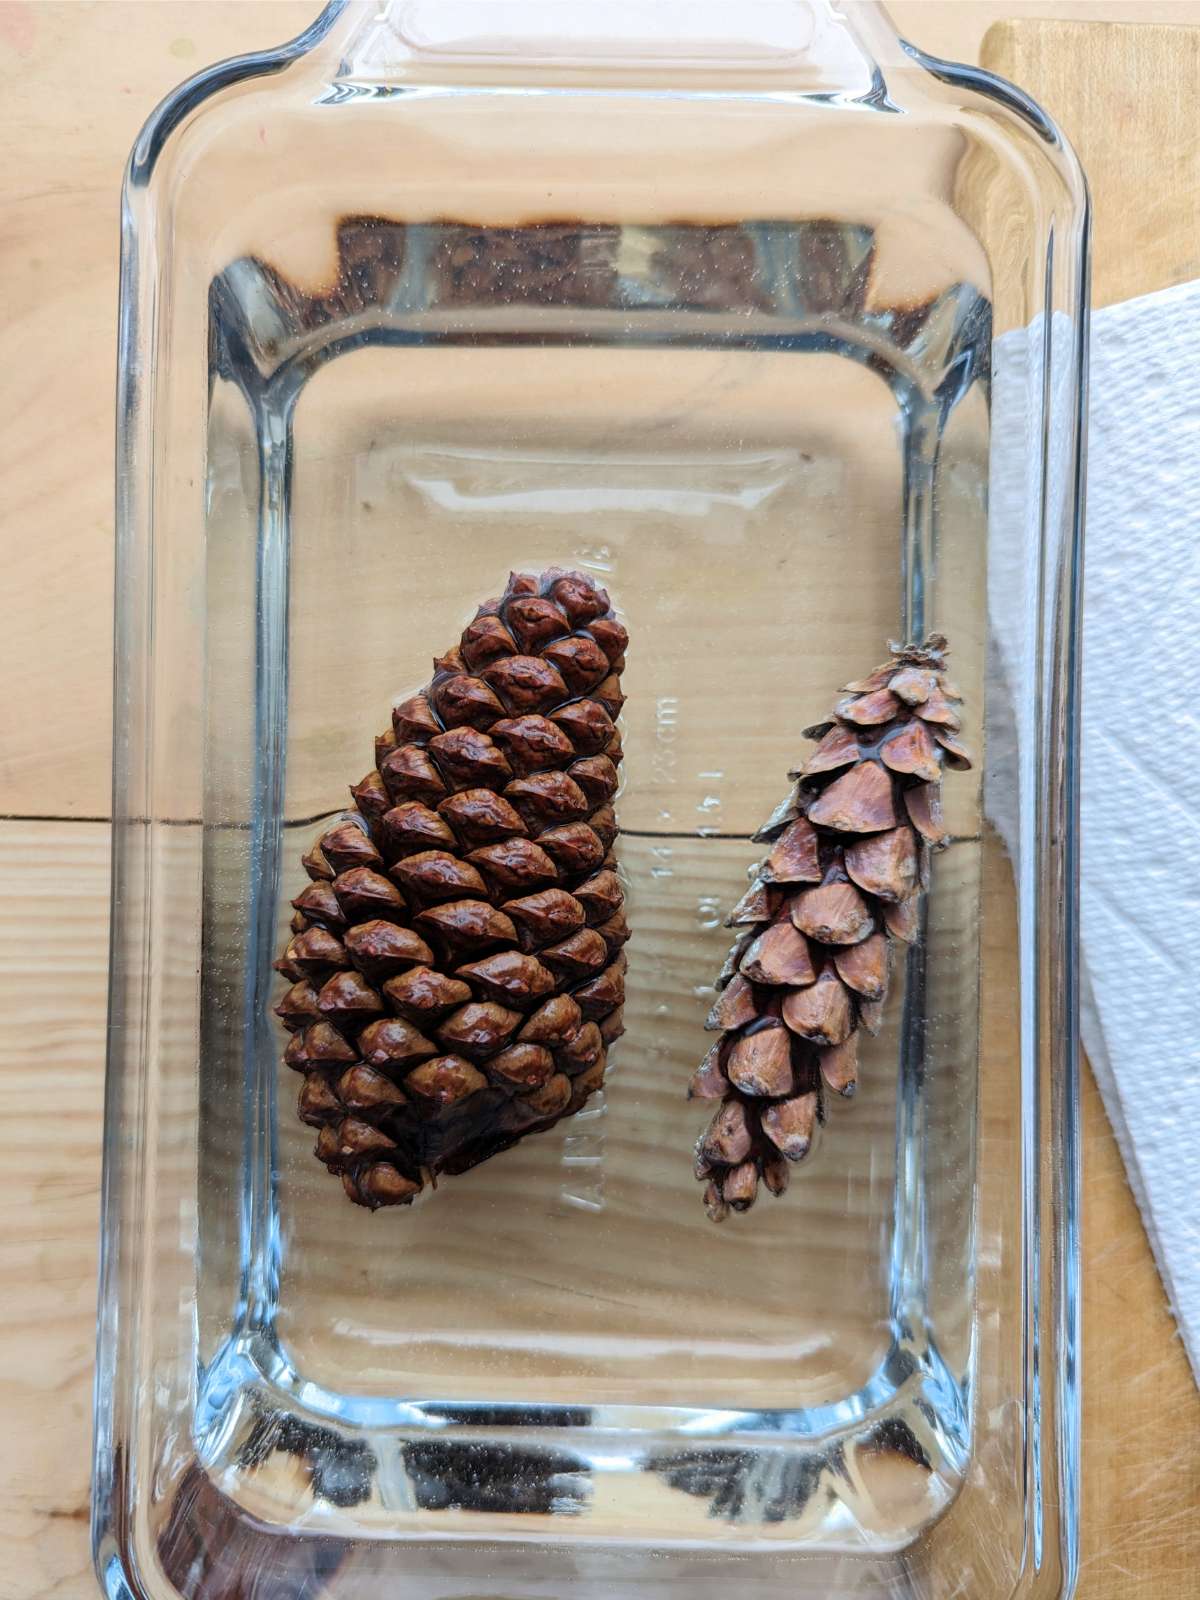 Two closed pinecones one large one small in a rectangular glass dish filled with water on a wooden table with white paper towels on the right.